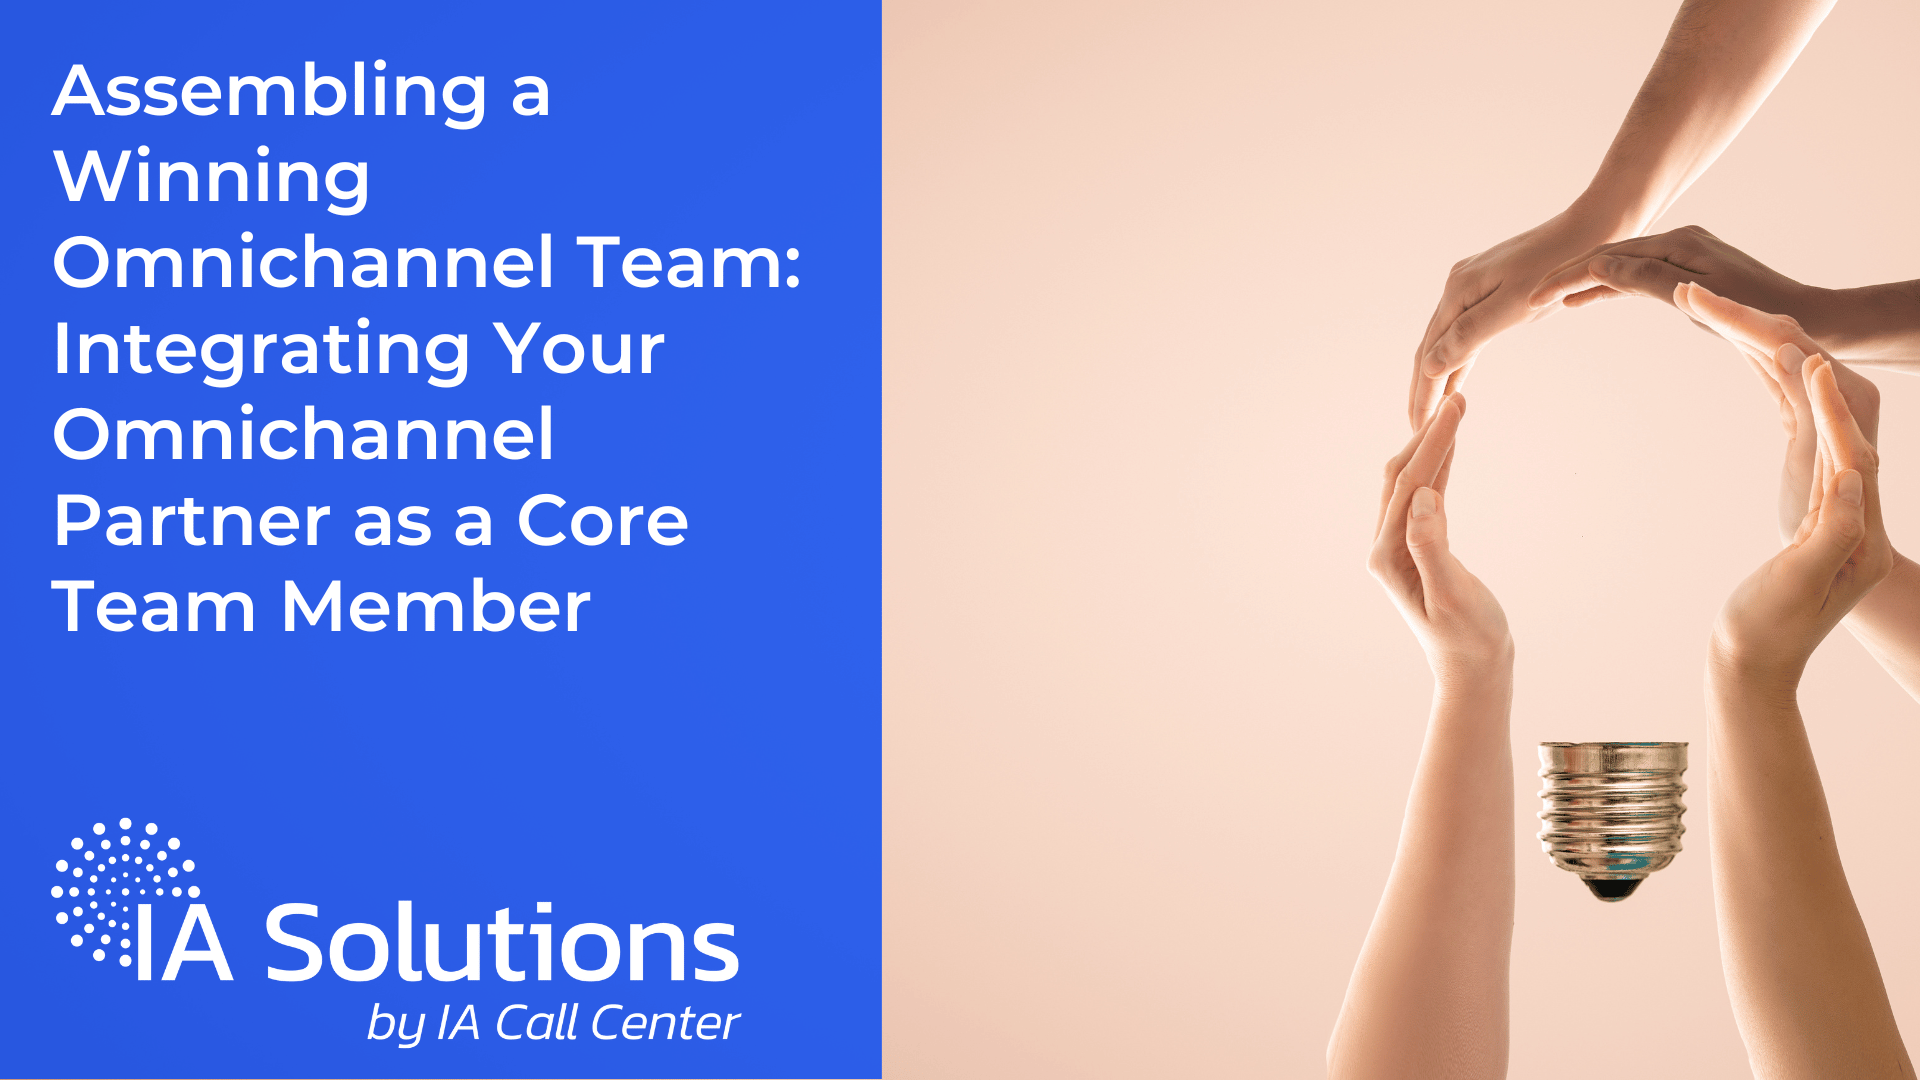 Integraring Your Omnichannel Partner as a Core Team Member Featured Image